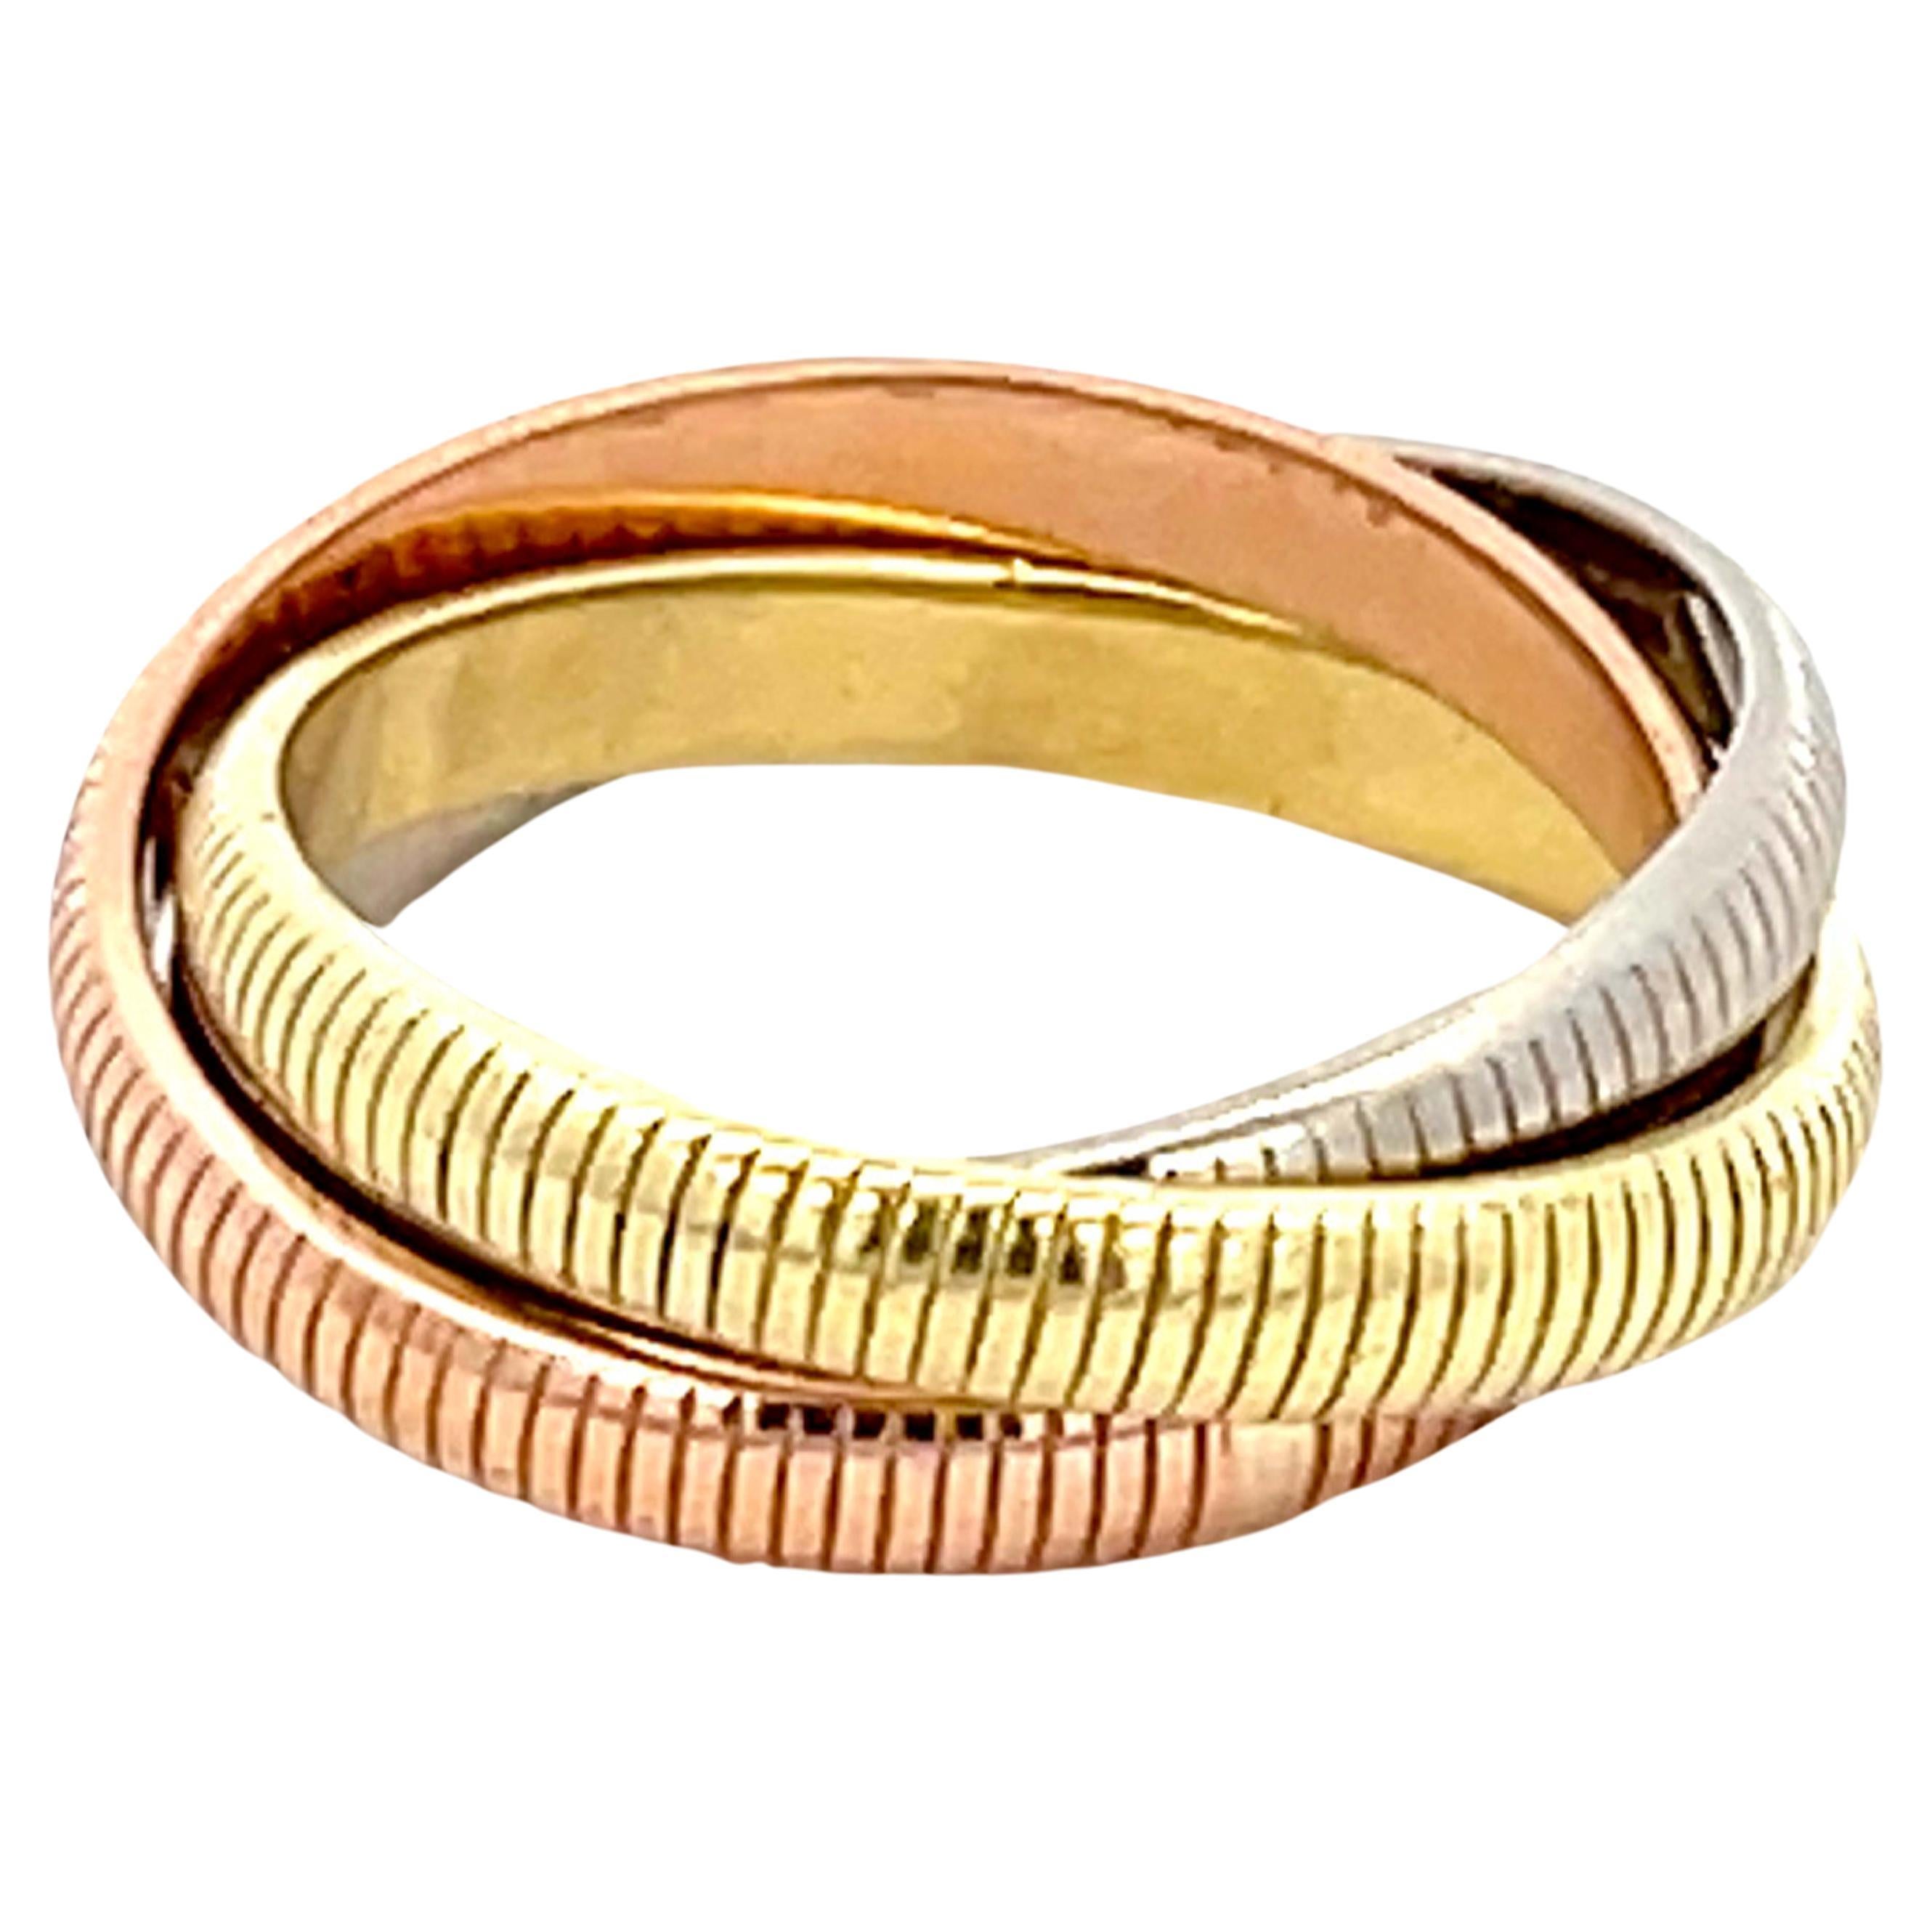 Vintage Cartier Ribbed Trinity Ring in 18k Gold